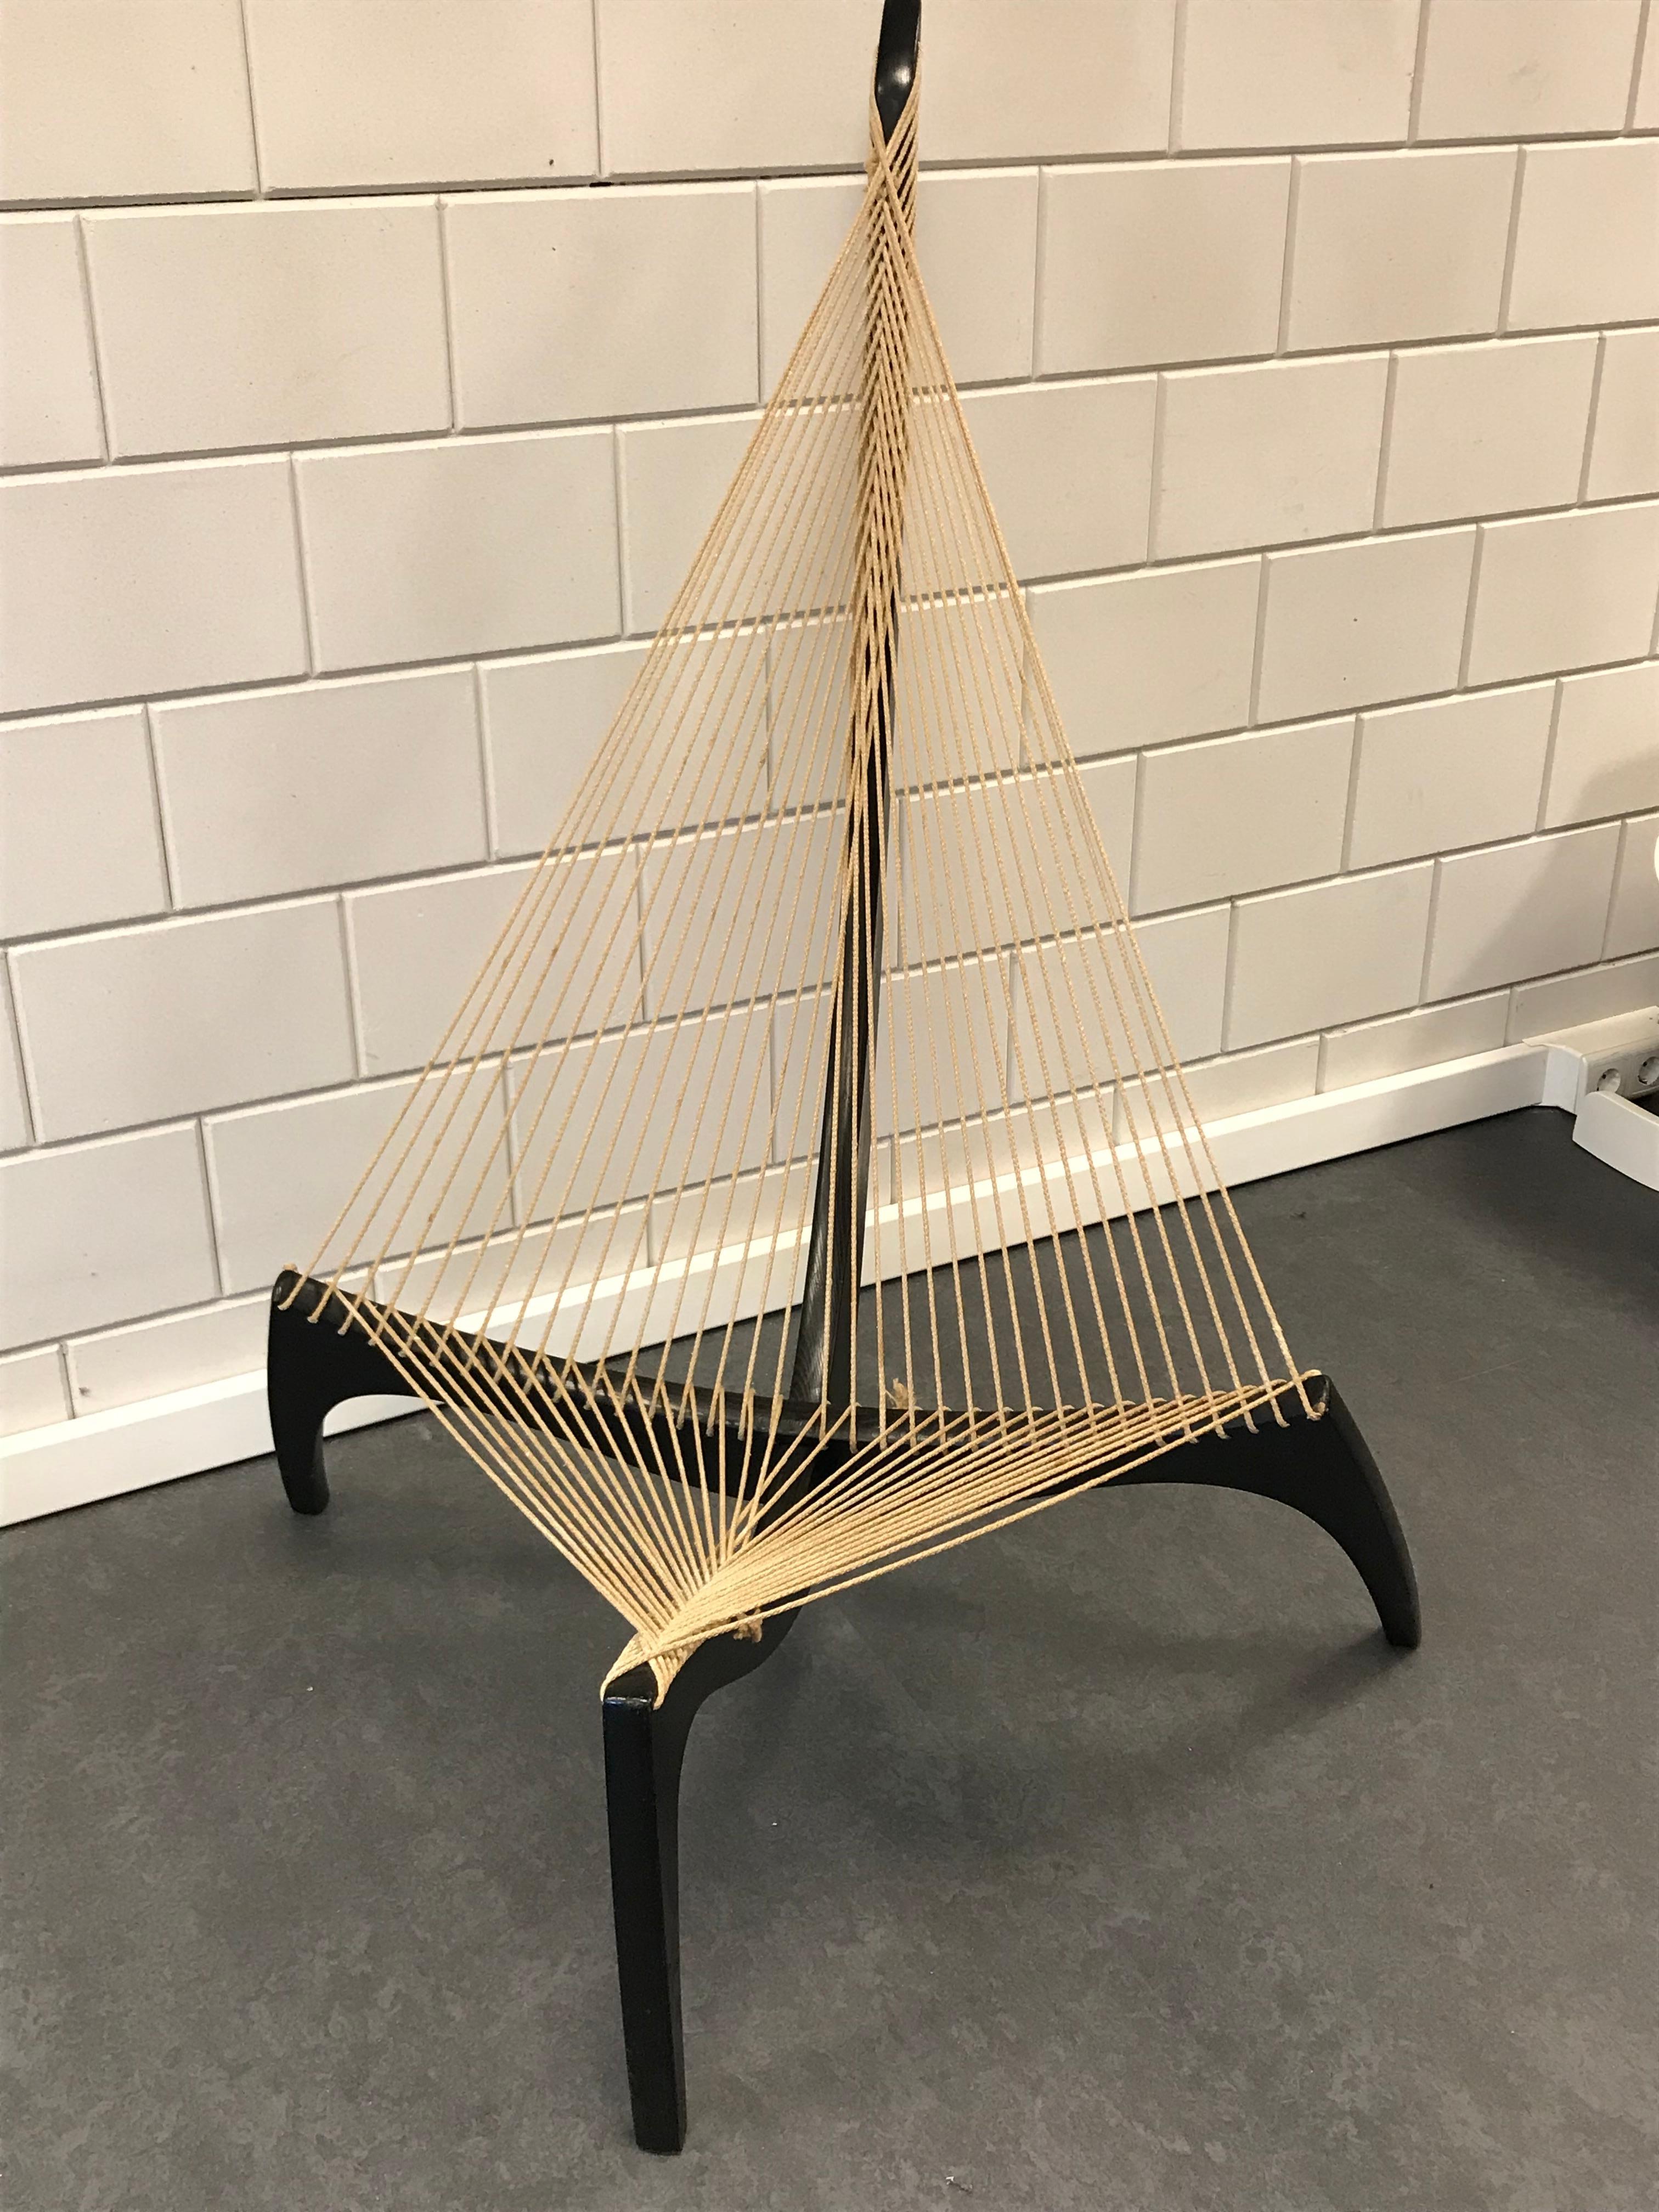 Very nice old Harp chair design 1968 by Jørgen Høvelskov.
Wooden frame with black finish and rope sitting
Good condition with a lot of character.
 